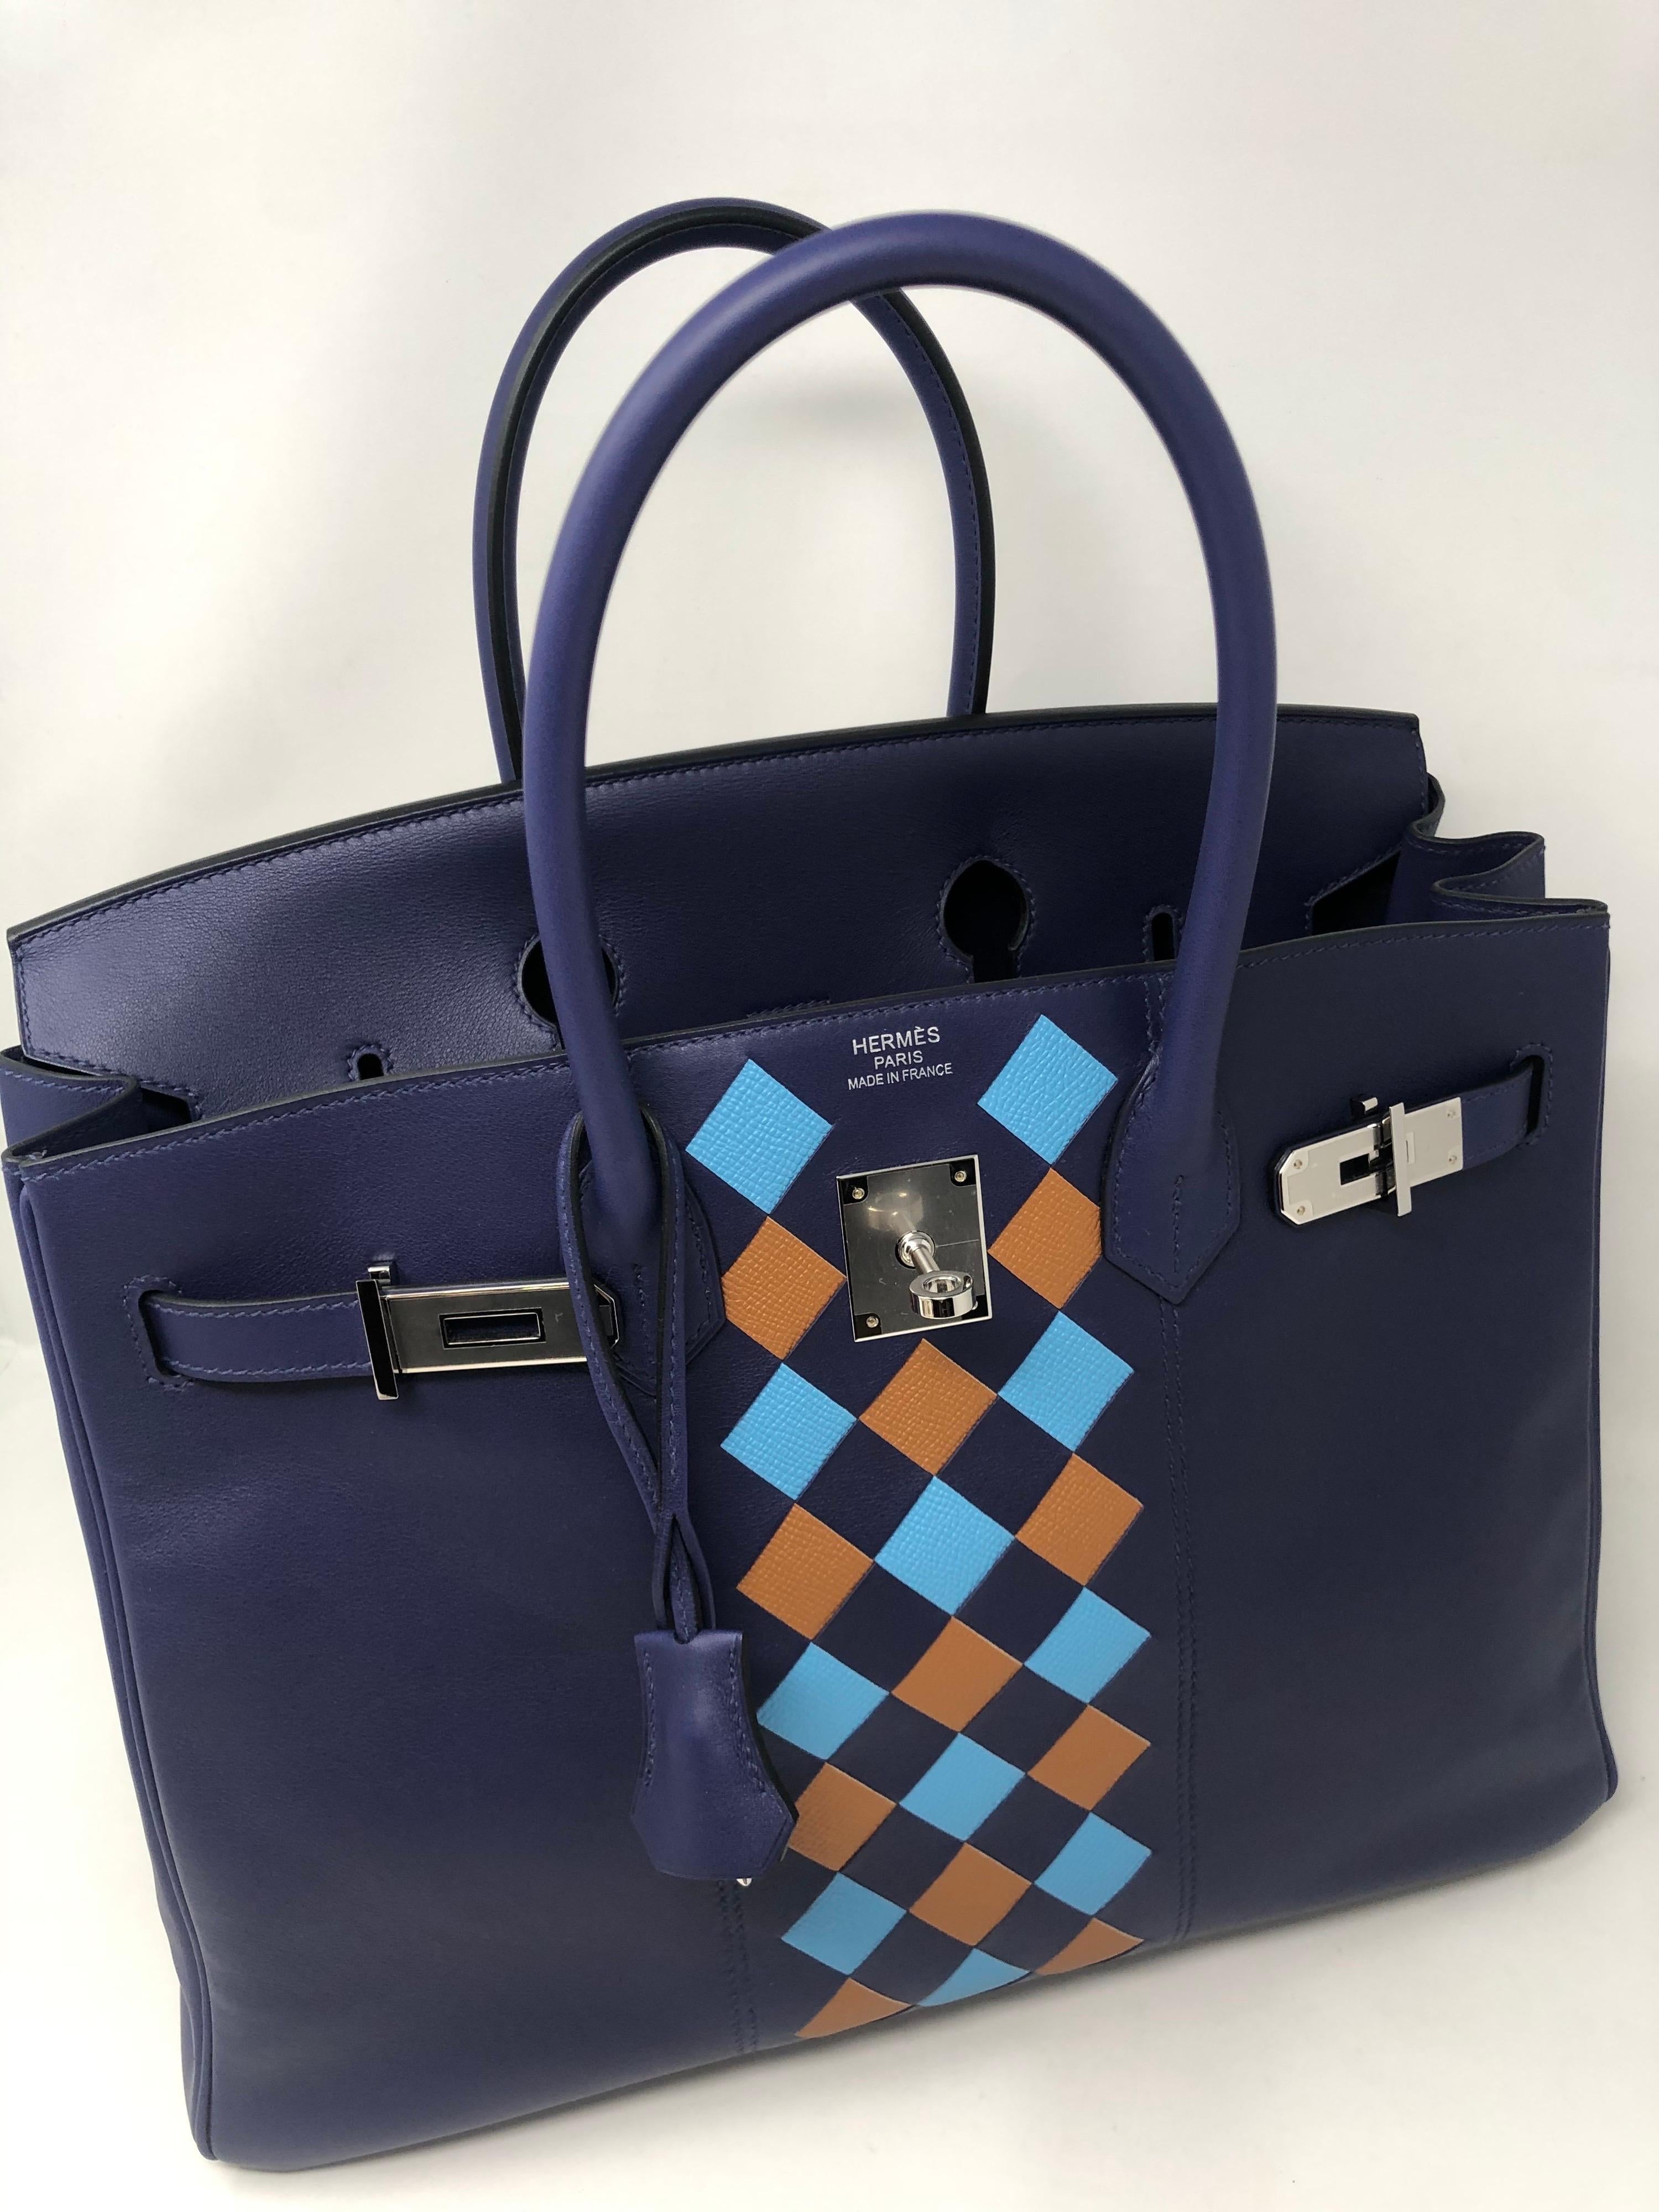 Hermes Bleu Encre Tressage De Cuir Birkin 35. Palladium hardware. Birkin is in Bleu Encre Swift leather and has Bleu De Nord and Gold Epsom leather Tressage design in front. Rare bag and limited. This bag has never been used. Brand new. Stayed in